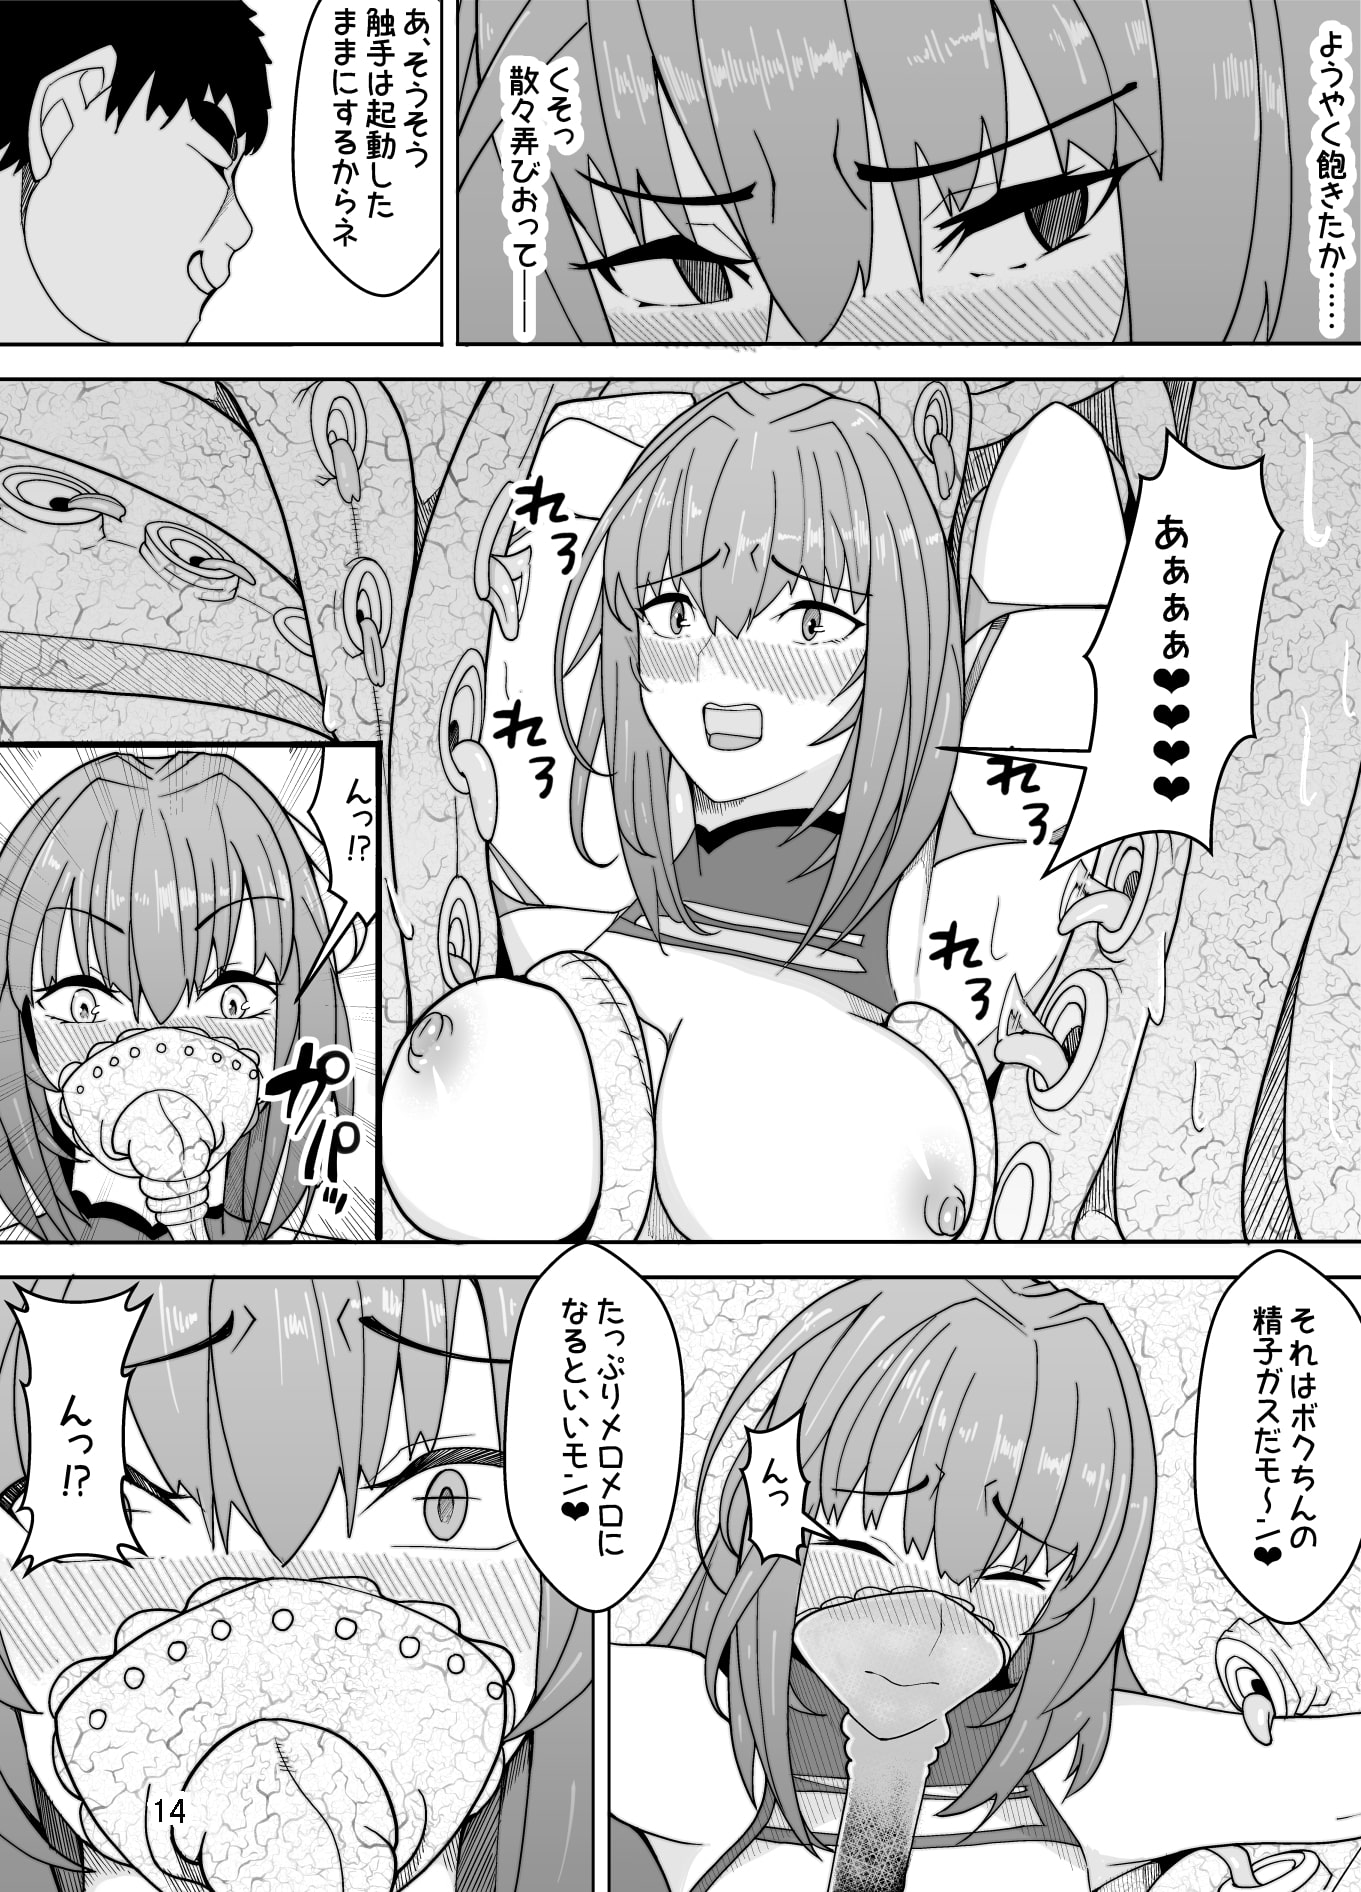 Scathach's Domination